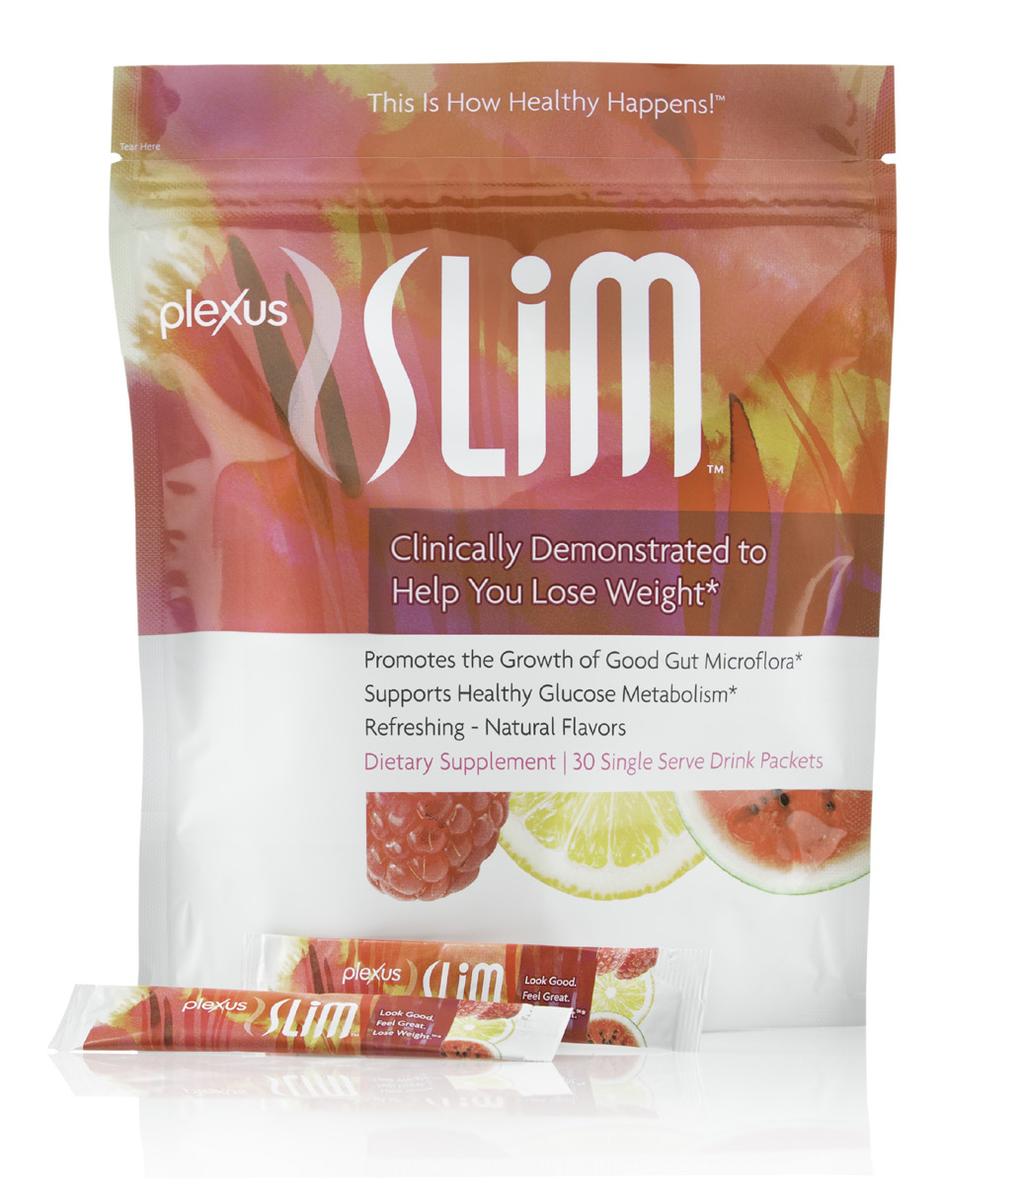 watermelon flavor. * WEIGHT MANAGEMENT * A GUT HEALTH CRISIS Real health begins in your gut.